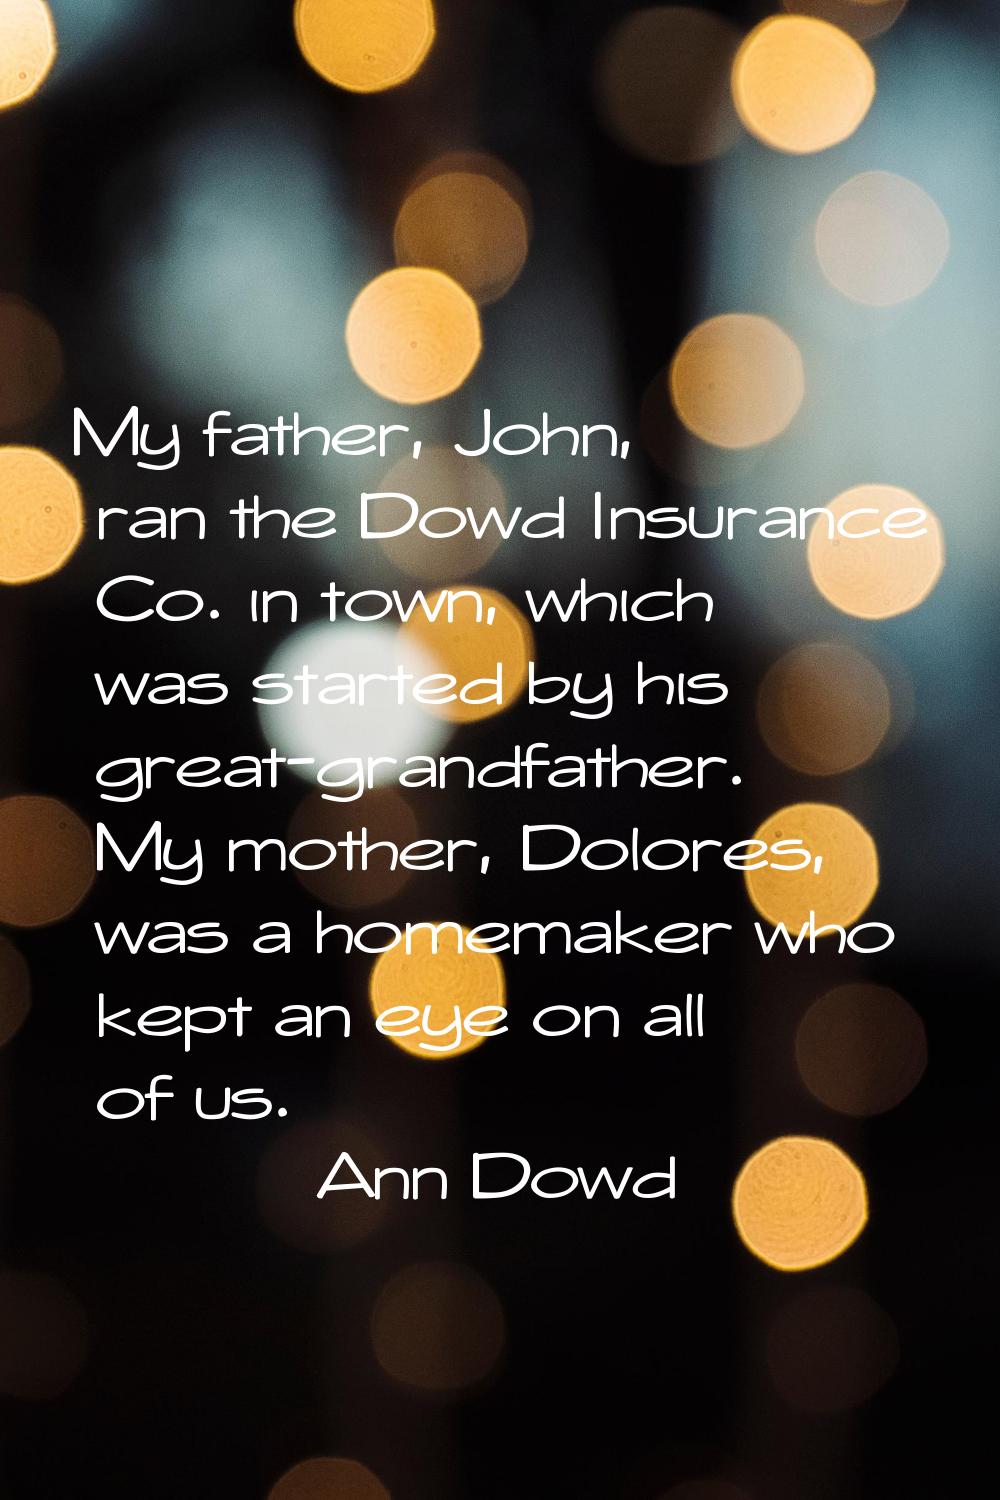 My father, John, ran the Dowd Insurance Co. in town, which was started by his great-grandfather. My